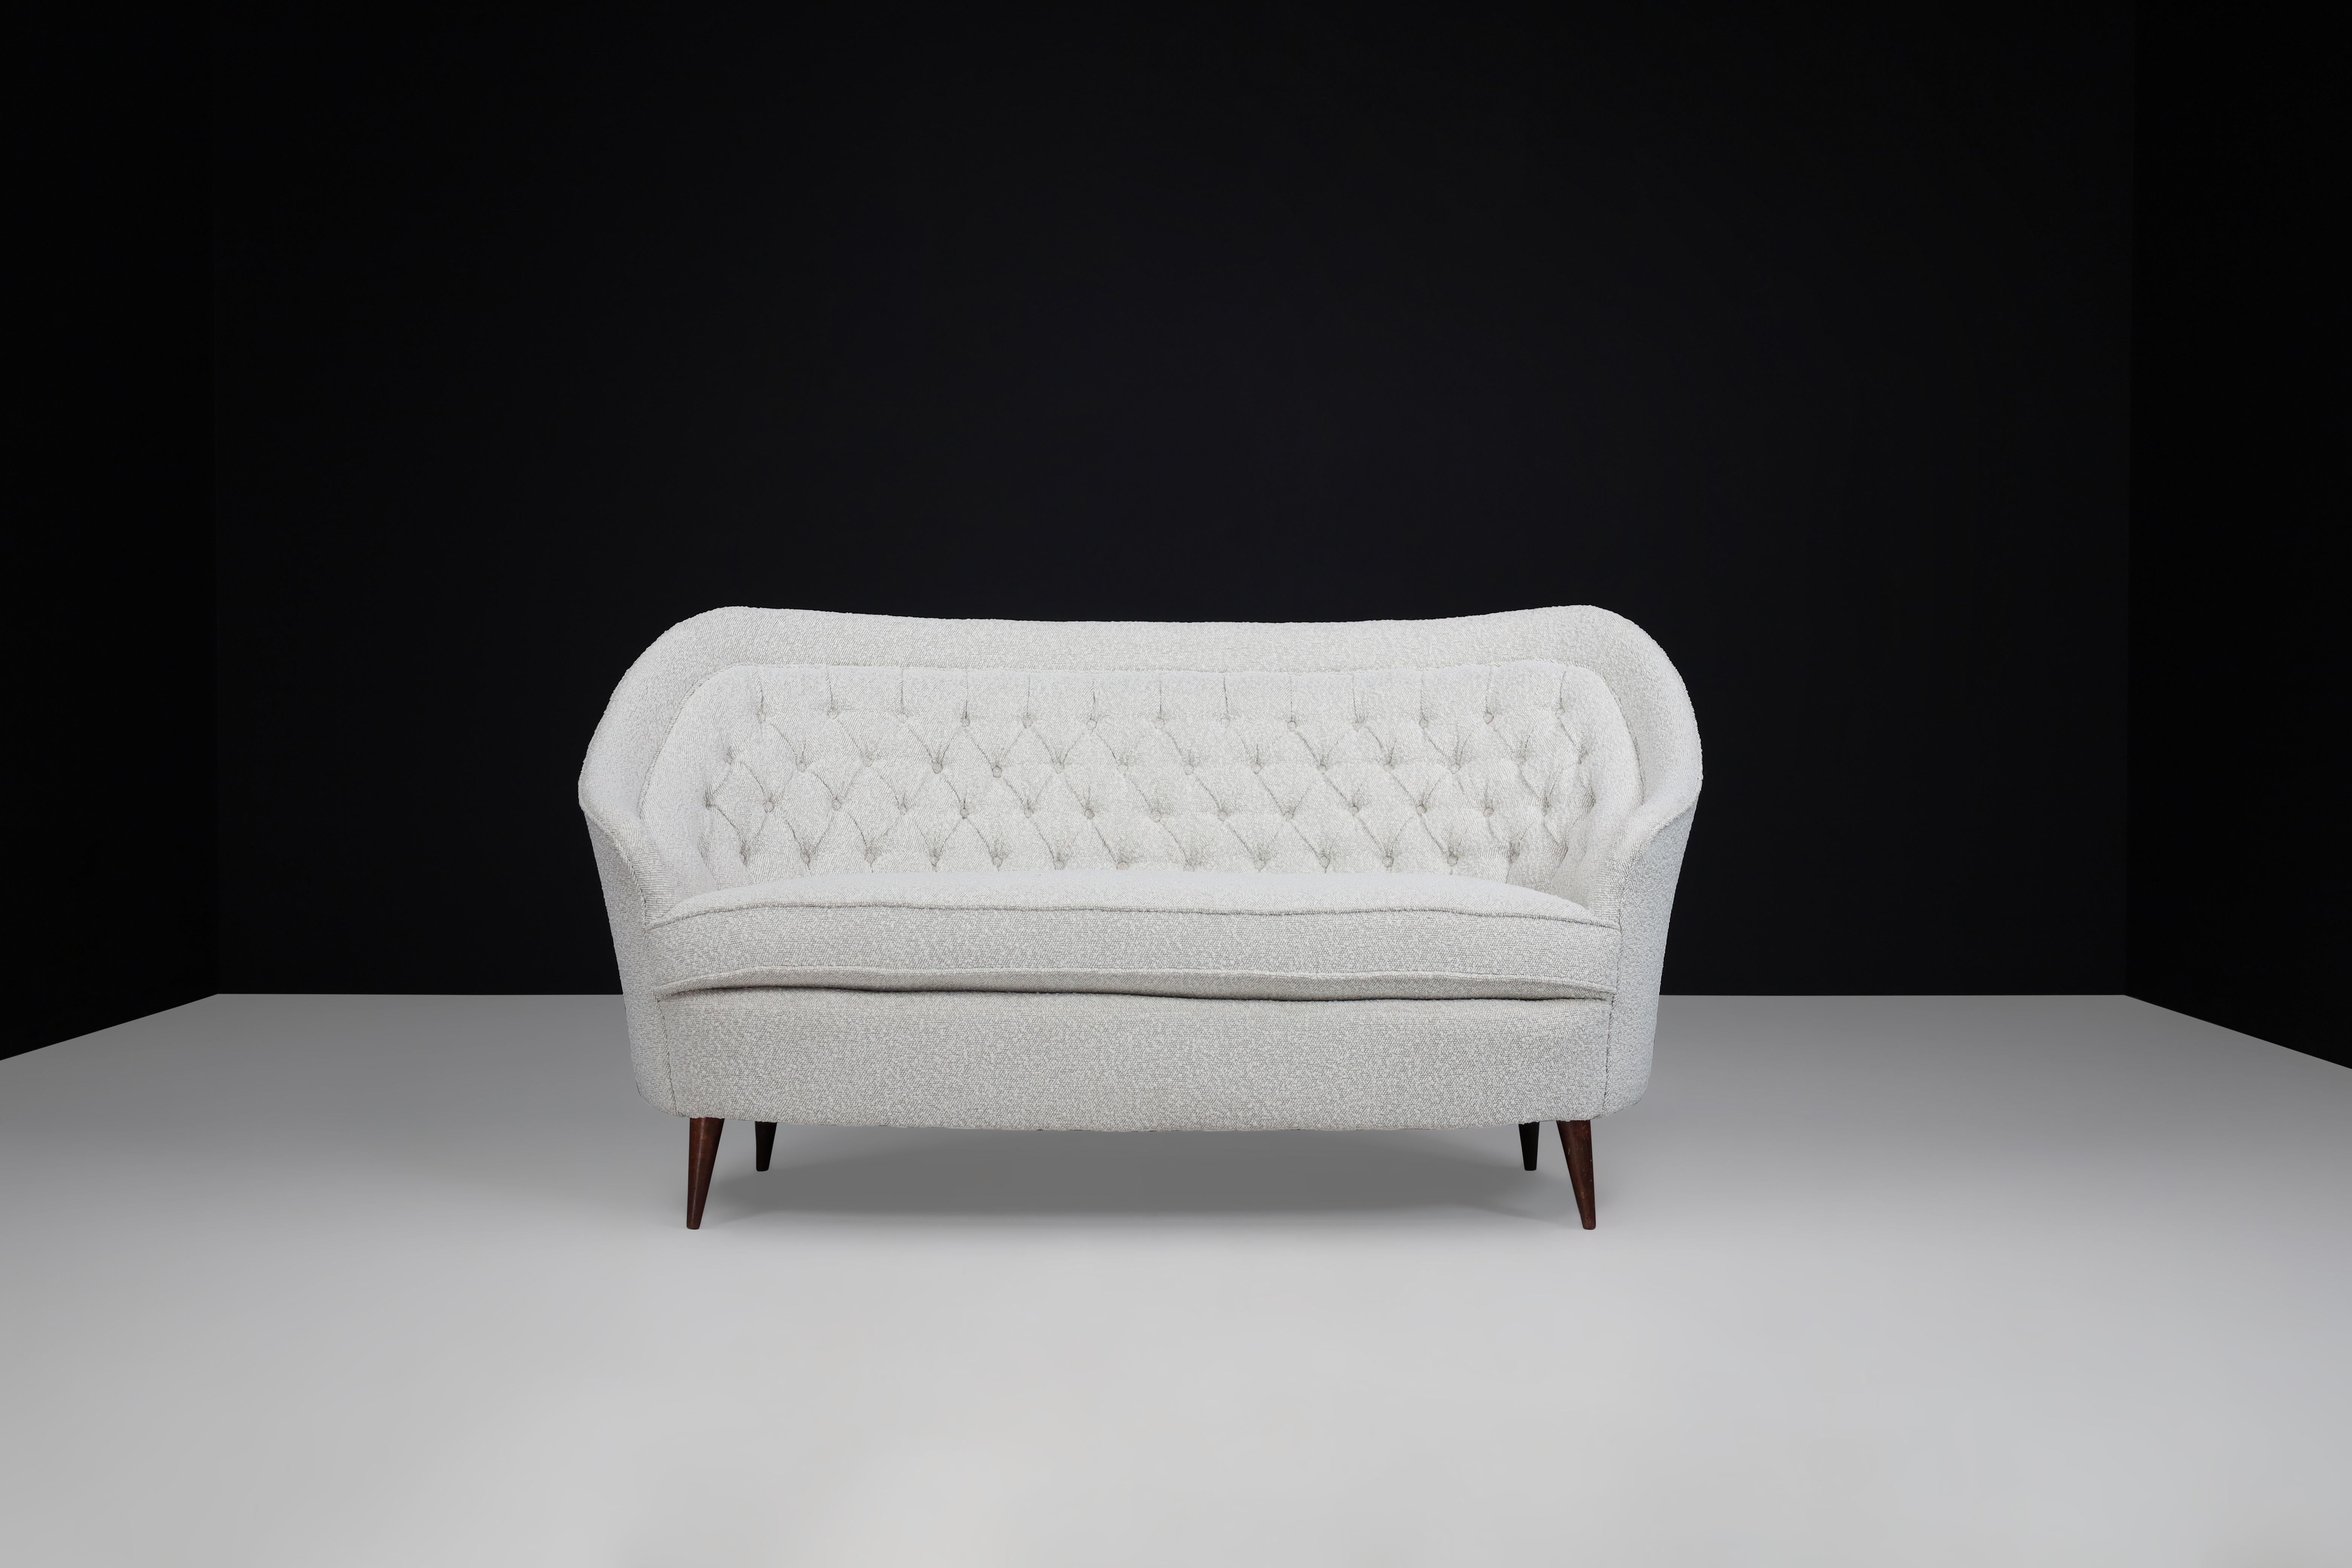 Gio Ponti For Casa E Giardino Midcentury Sofa in Bouclé upholstery Italy 1940s

This midcentury Italian sofa is undeniably elegant and comfortable. Its unique design boasts a gently sloping dome-shaped back and a scalloped front that ends on